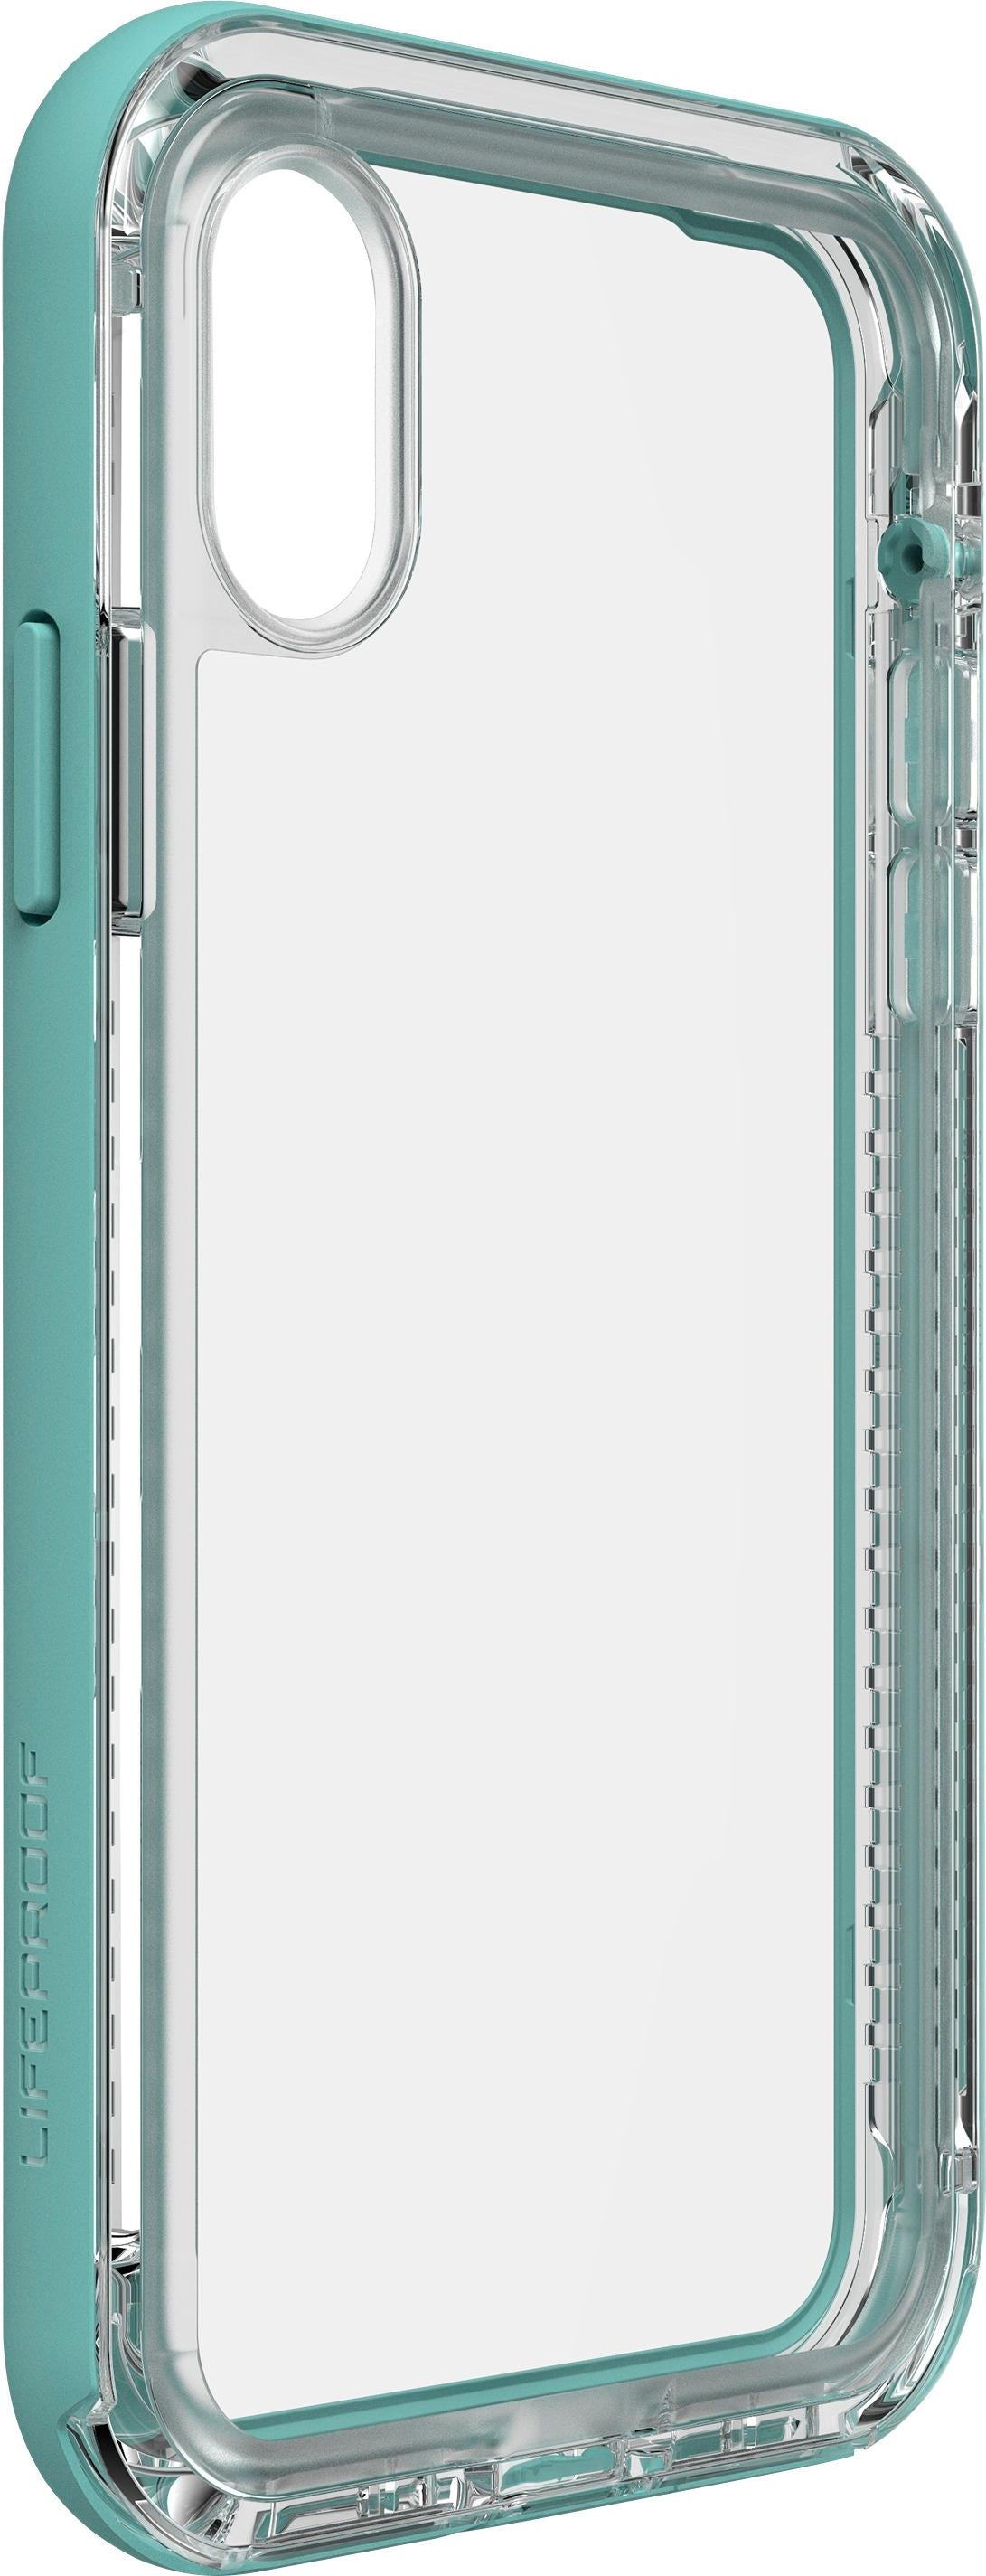 LifeProof NEXT SERIES Case for Apple iPhone X / Apple iPhone XS - Seaside (Certified Refurbished)